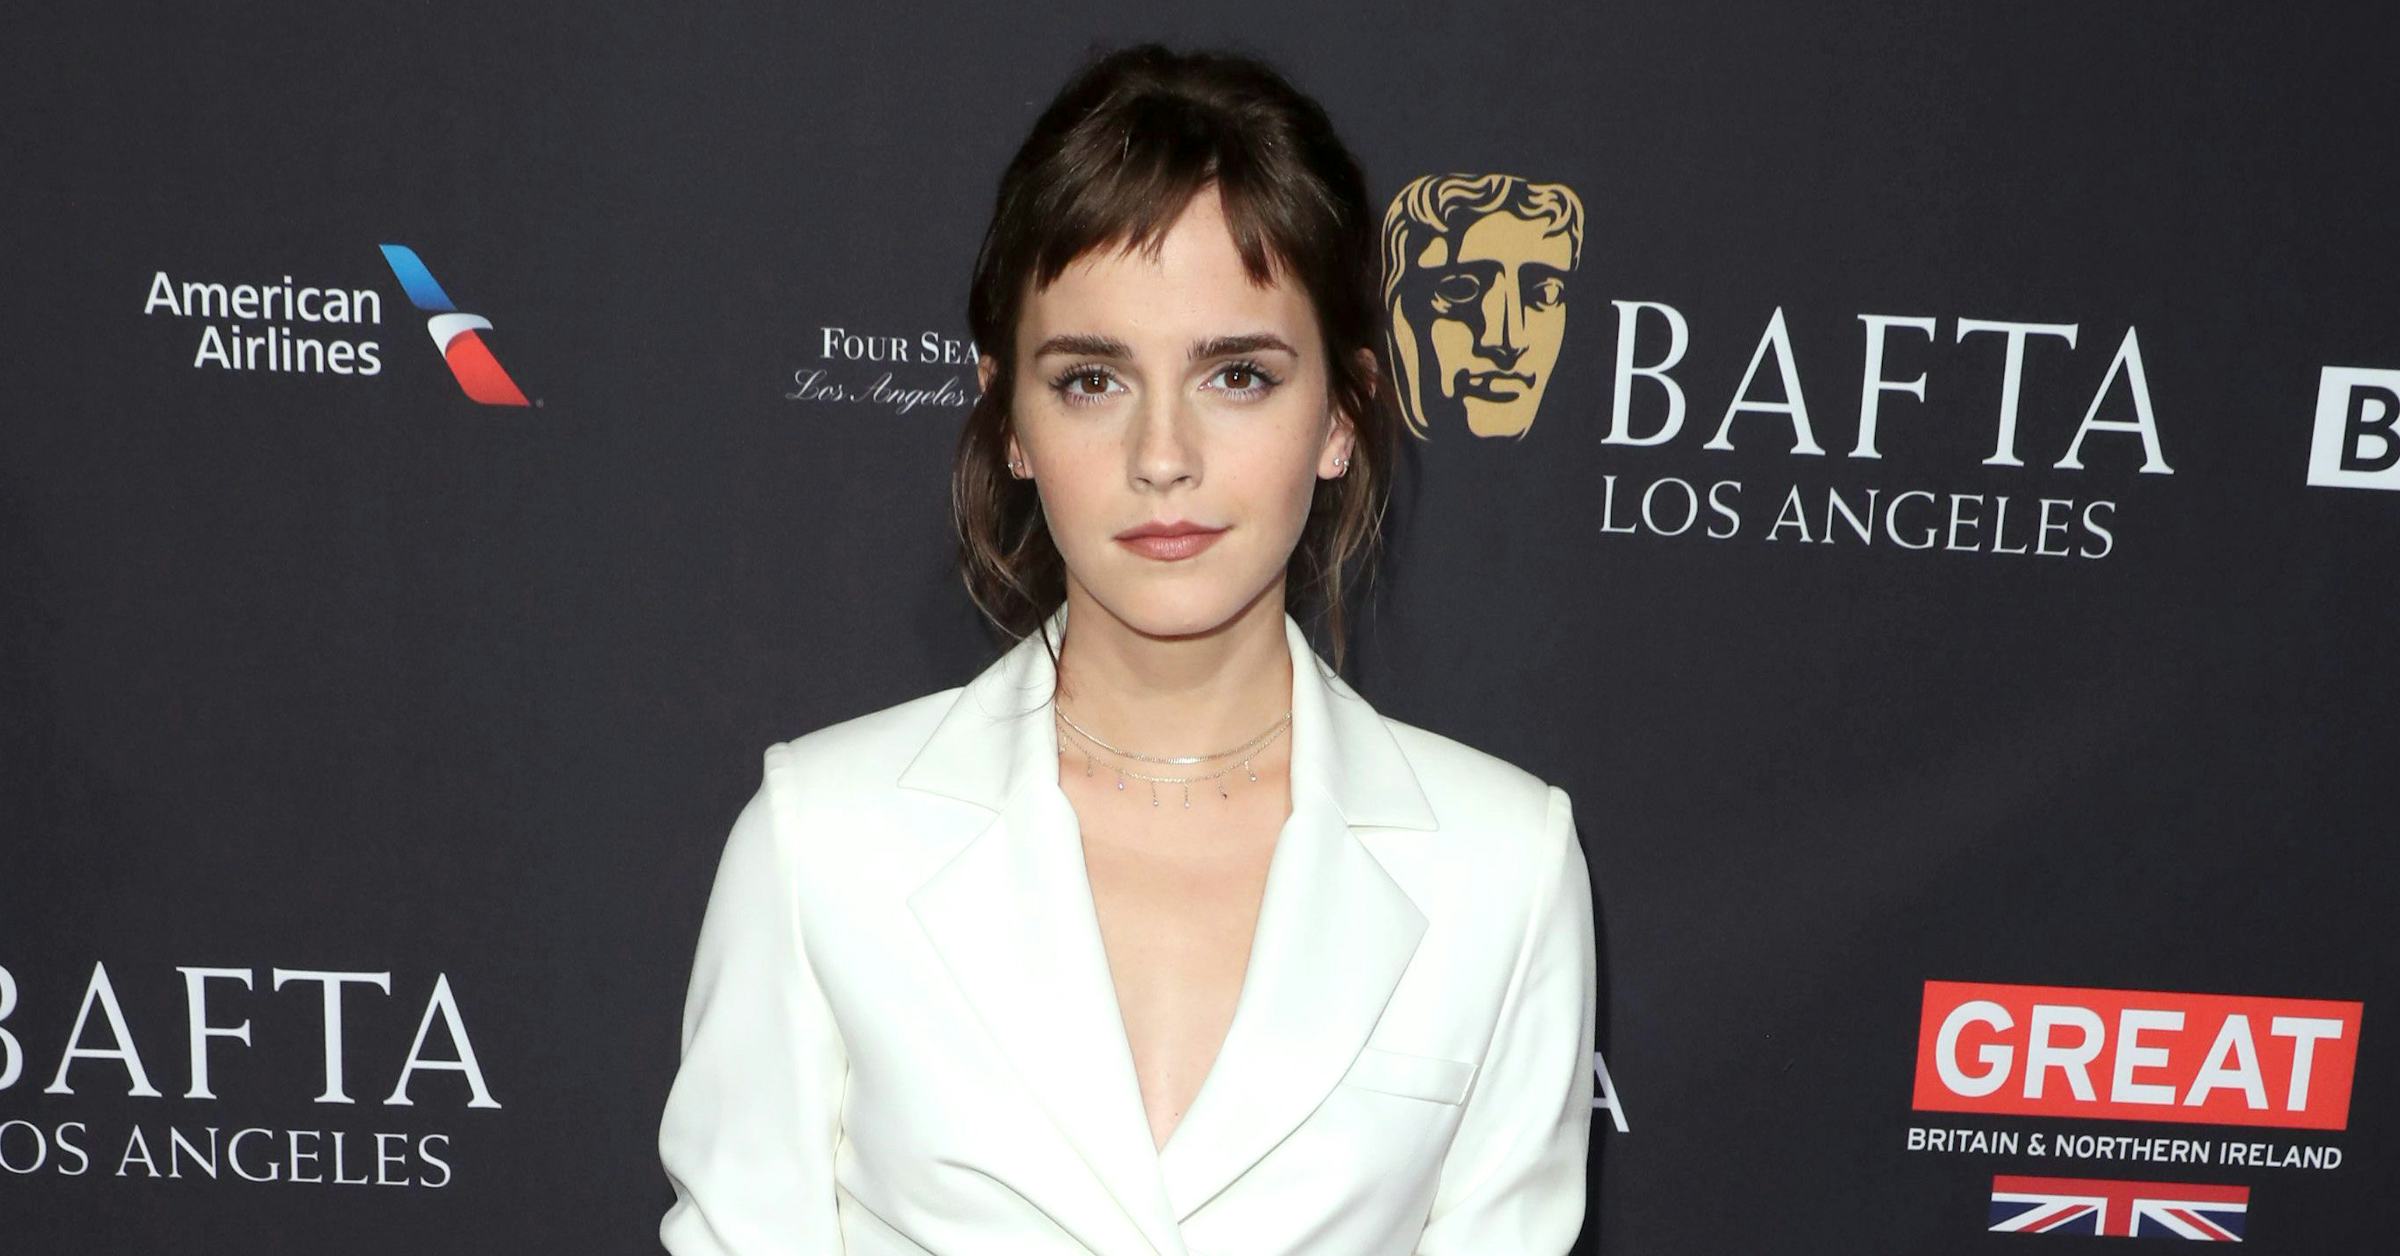 Emma Watson Launches Hotline For Workplace Sexual Harassment